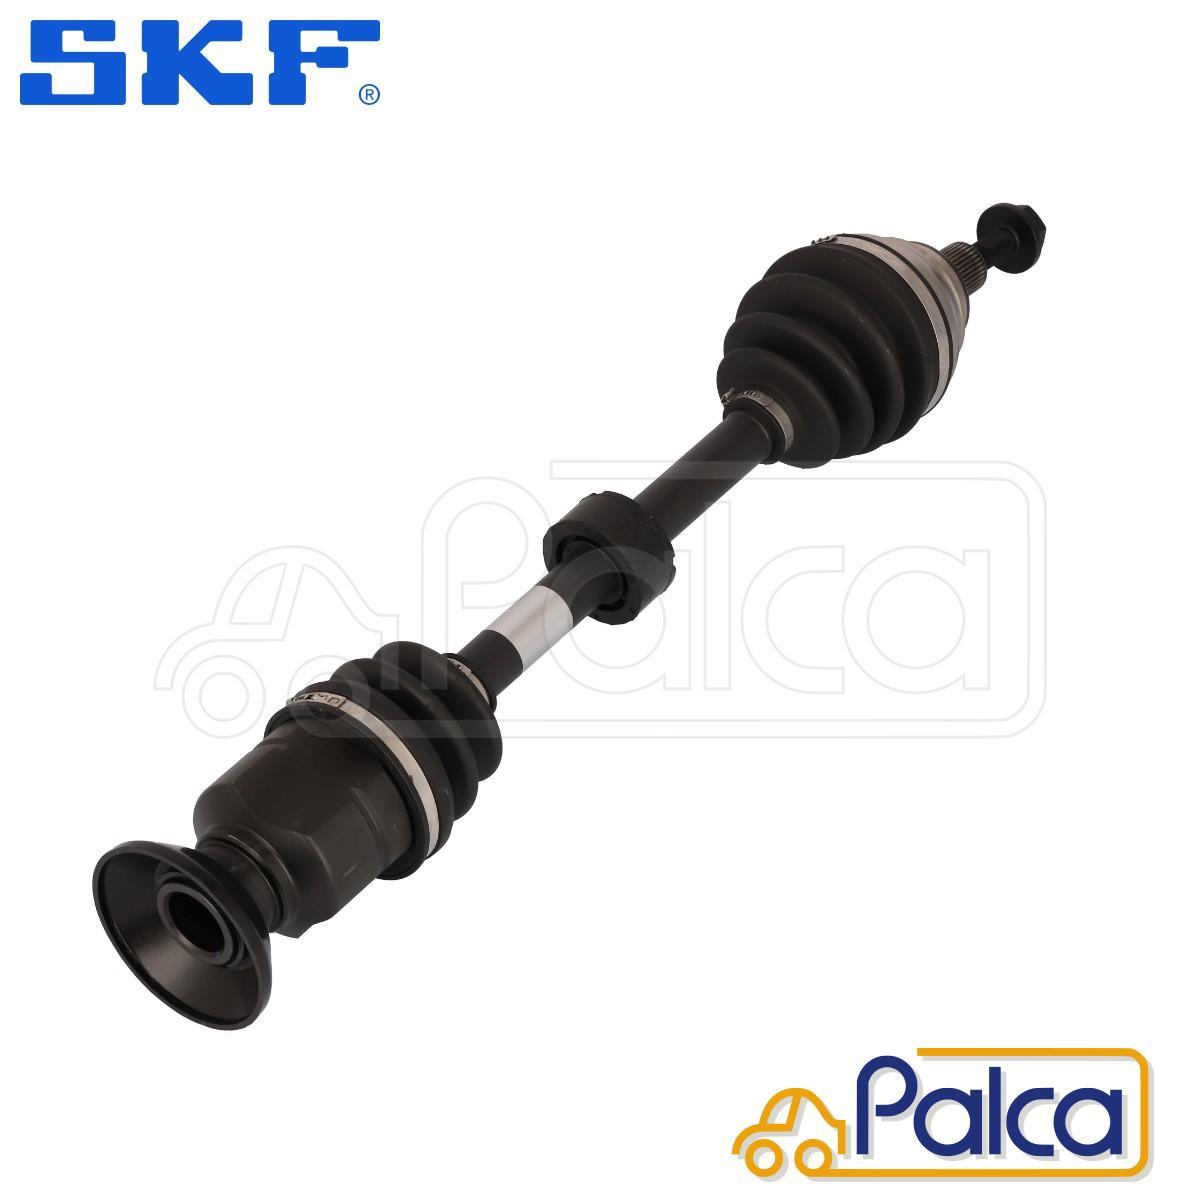 VW/ Volkswagen front drive shaft right Tiguan /5NCAW 5NCCZ 2.0TSI | SKF made 5N0407766D agreement 